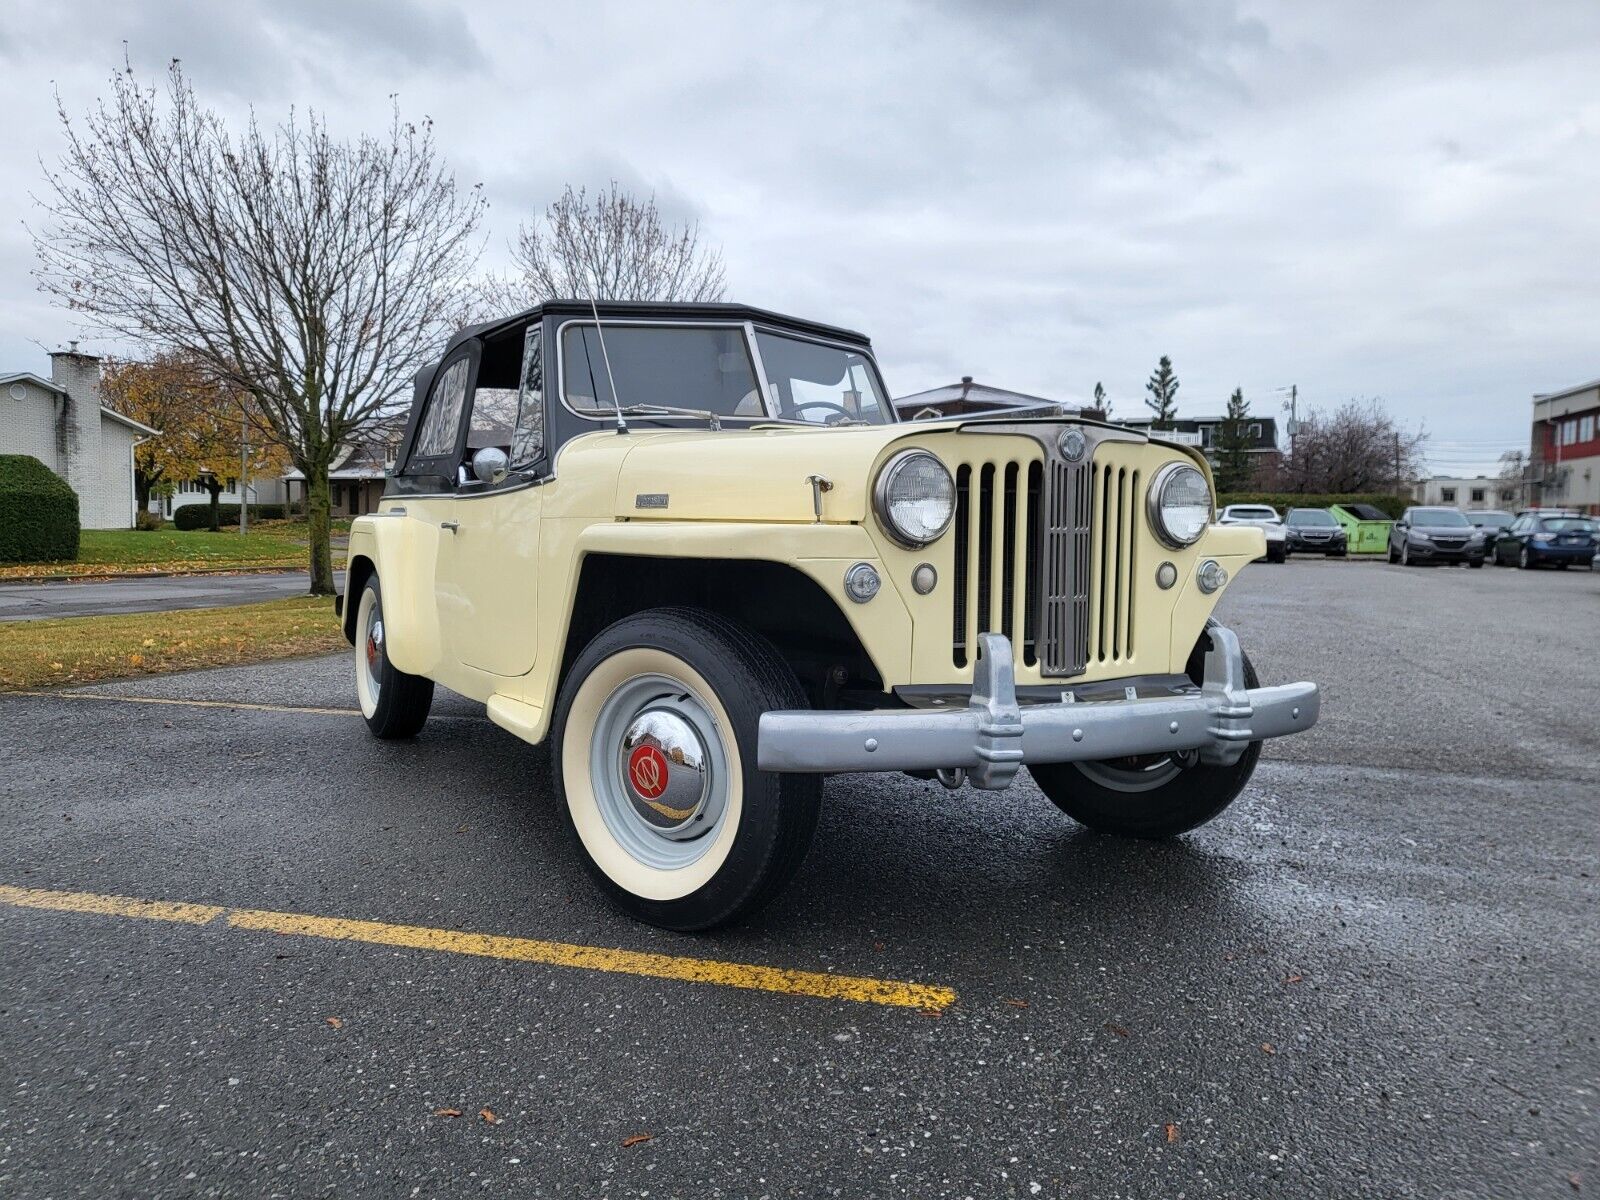 Willys Jeepster Cabriolet 1948 à vendre